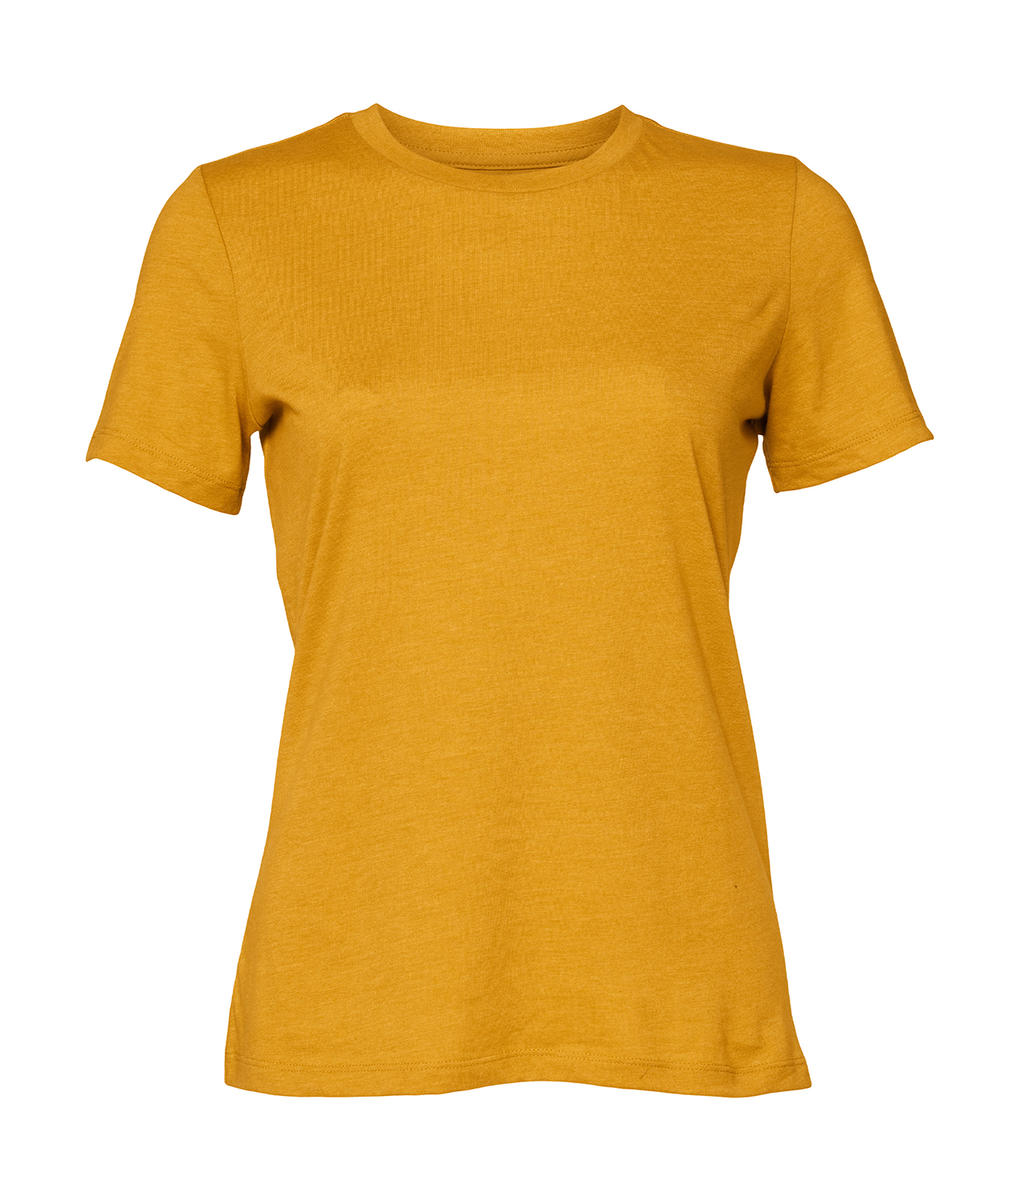  Womens Relaxed CVC Jersey Short Sleeve Tee in Farbe Heather Mustard